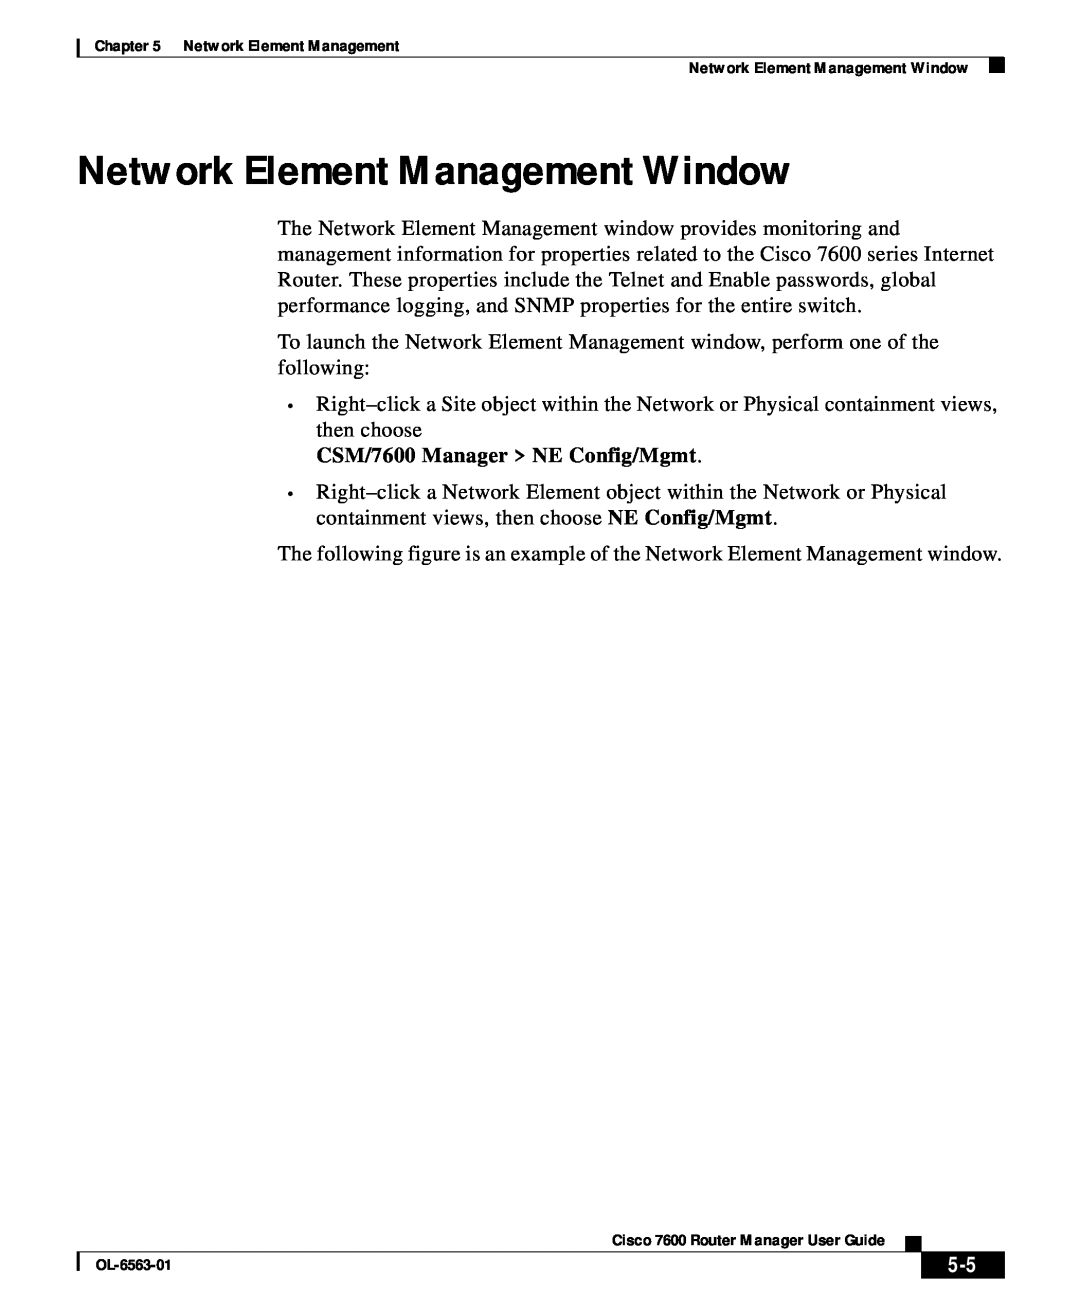 Cisco Systems OL-6563-01 manual Network Element Management Window, CSM/7600 Manager NE Config/Mgmt 